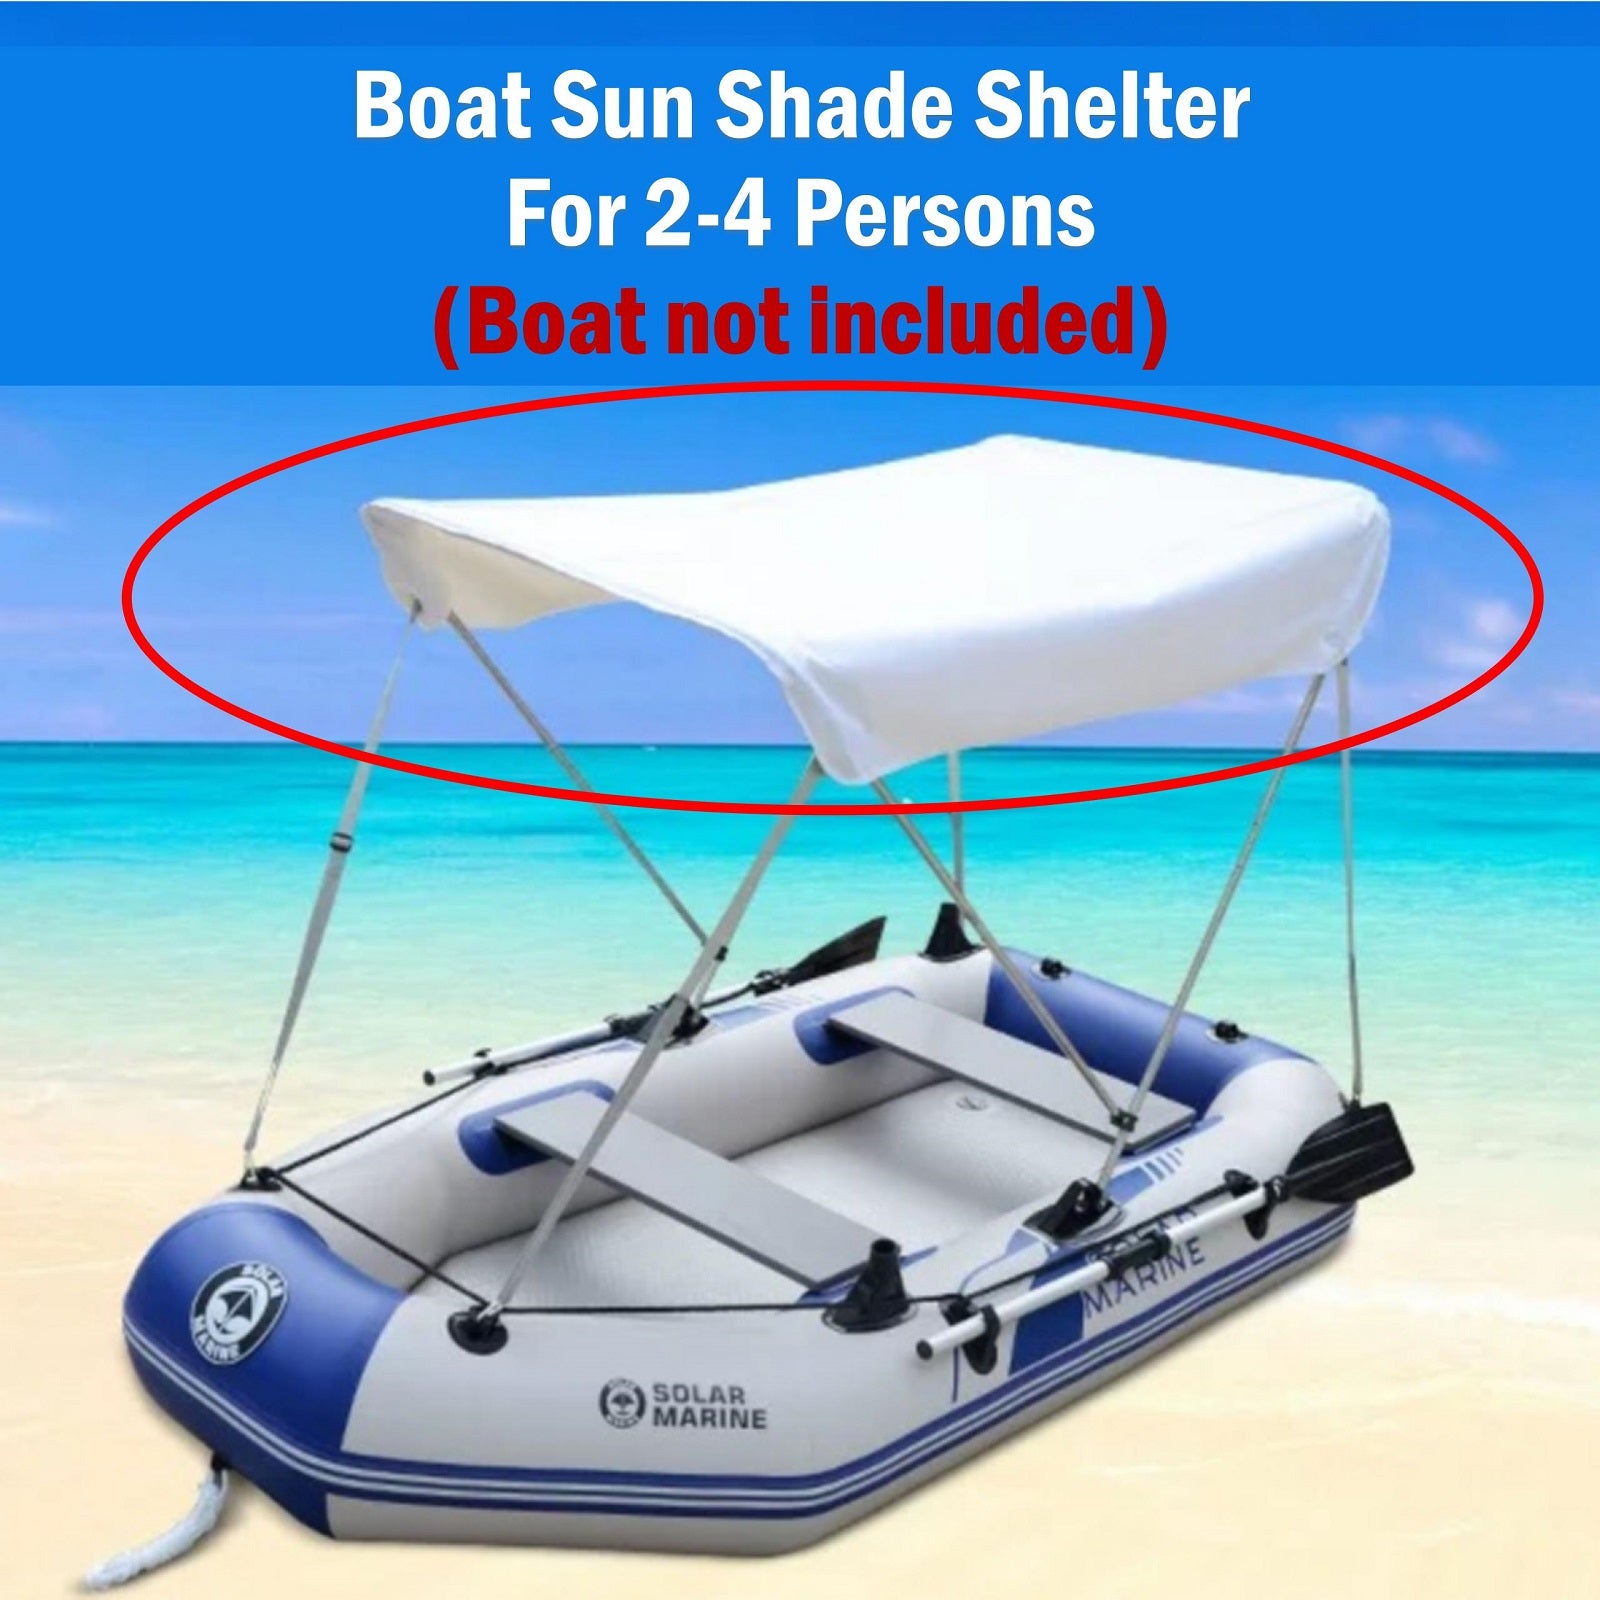 Boat Sun Shade Shelter For 2-4 Persons Inflatable Kayak Awning Canopy